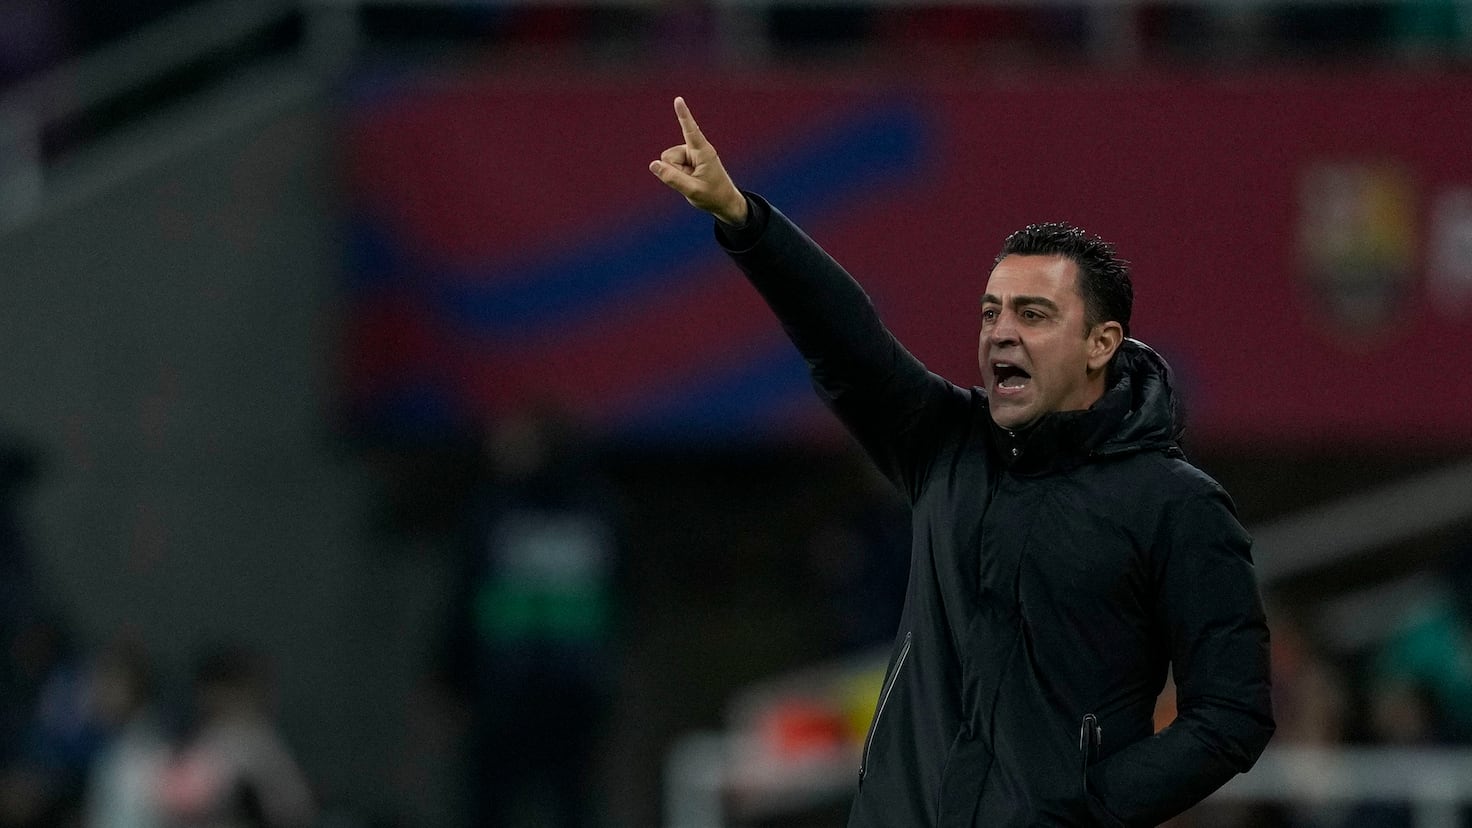 Xavi's Reflection on Tactics and Confidence Ahead of the High-Intensity Montilivi Showdown